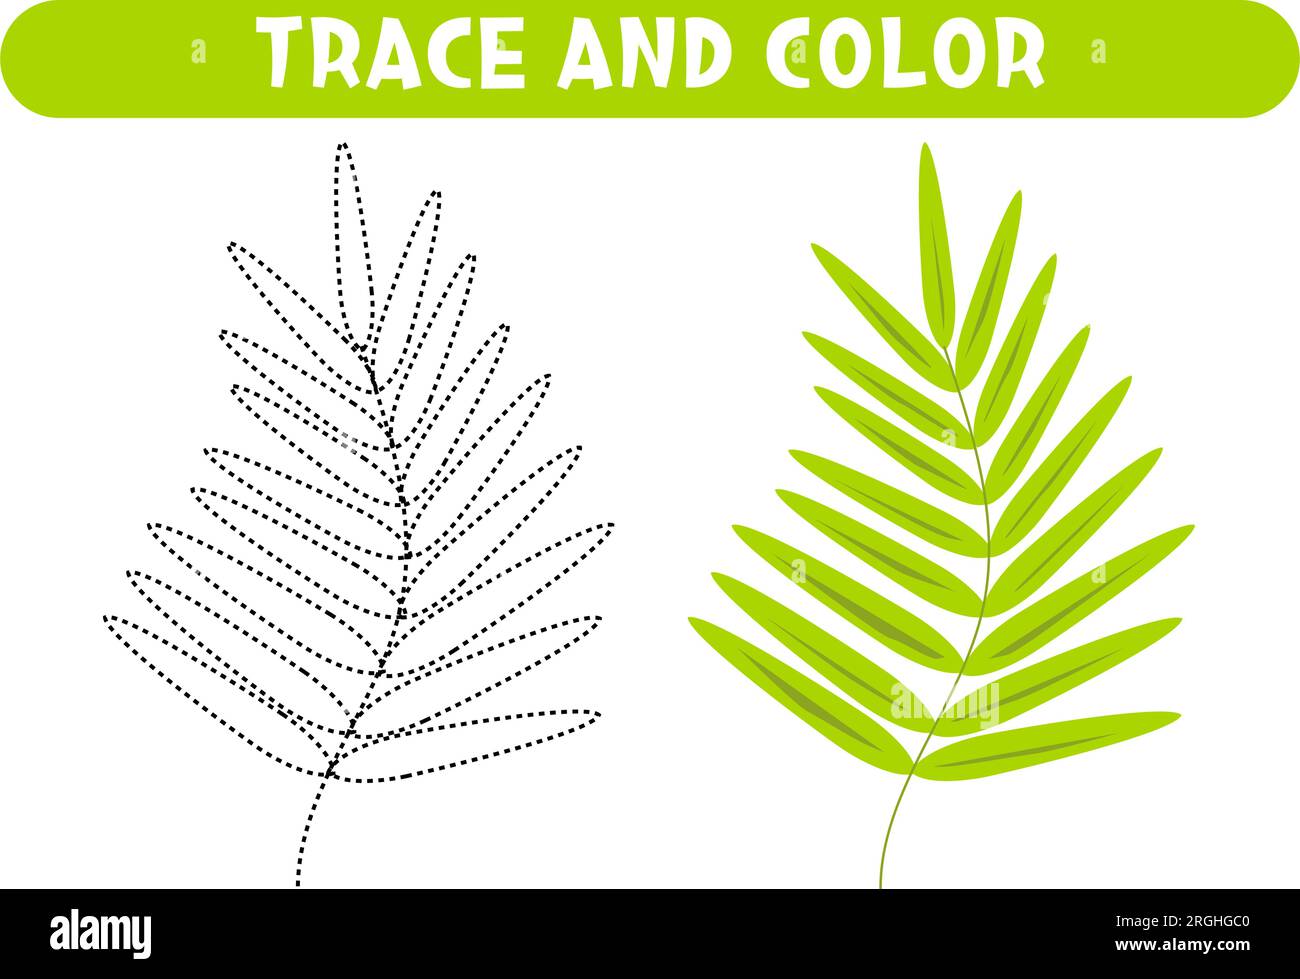 Trace and color green leaf. Worksheet for kids Stock Vector